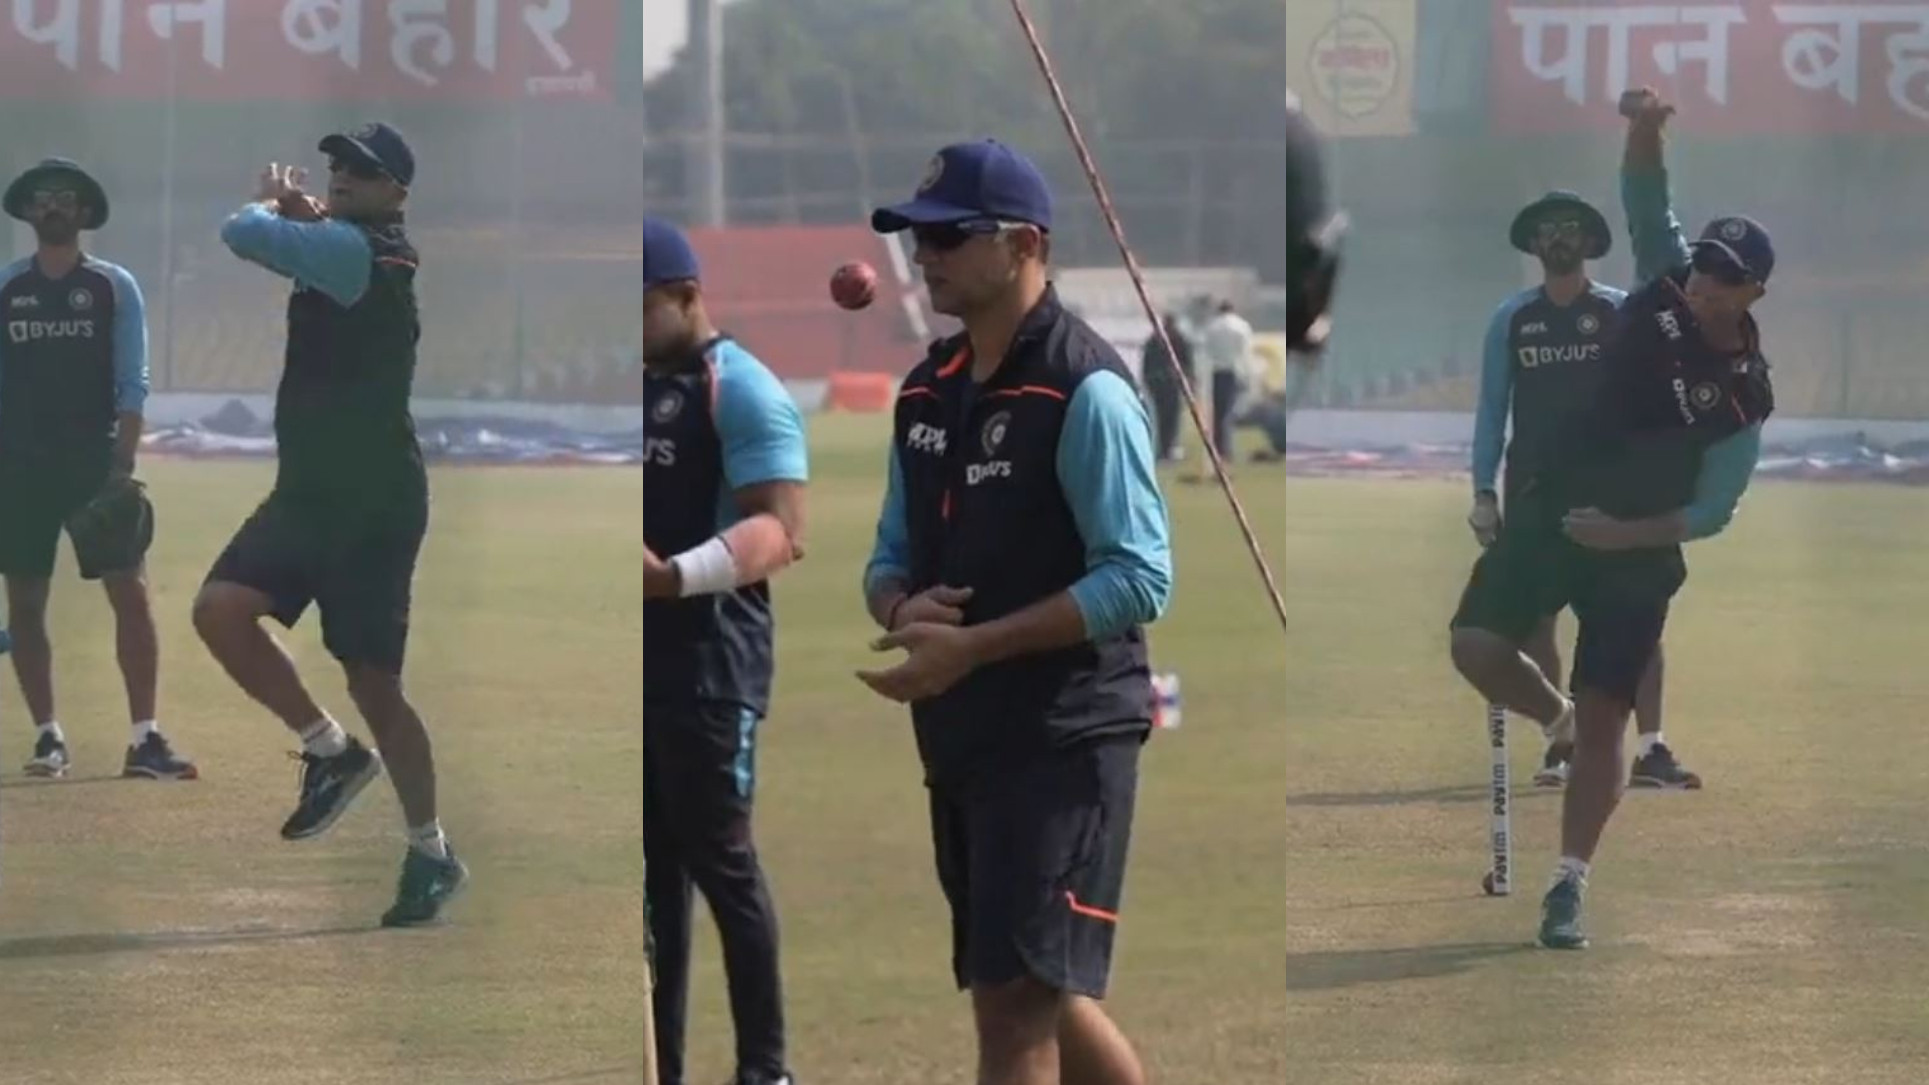 IND v NZ 2021: WATCH- Head coach Rahul Dravid bowls off-spin in nets before 1st Test in Kanpur